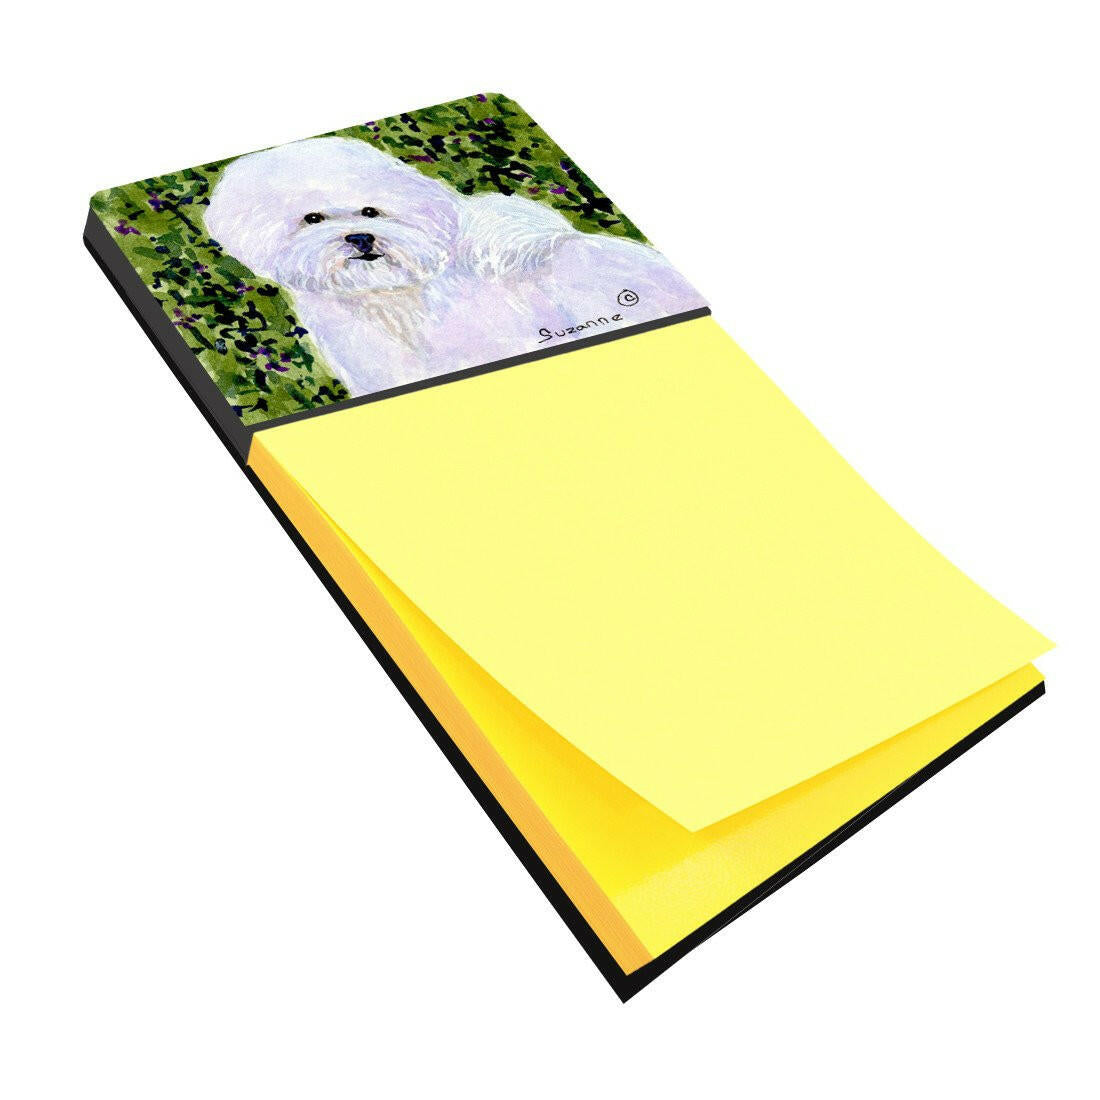 Bichon Frise Refiillable Sticky Note Holder or Postit Note Dispenser SS8817SN by Caroline's Treasures